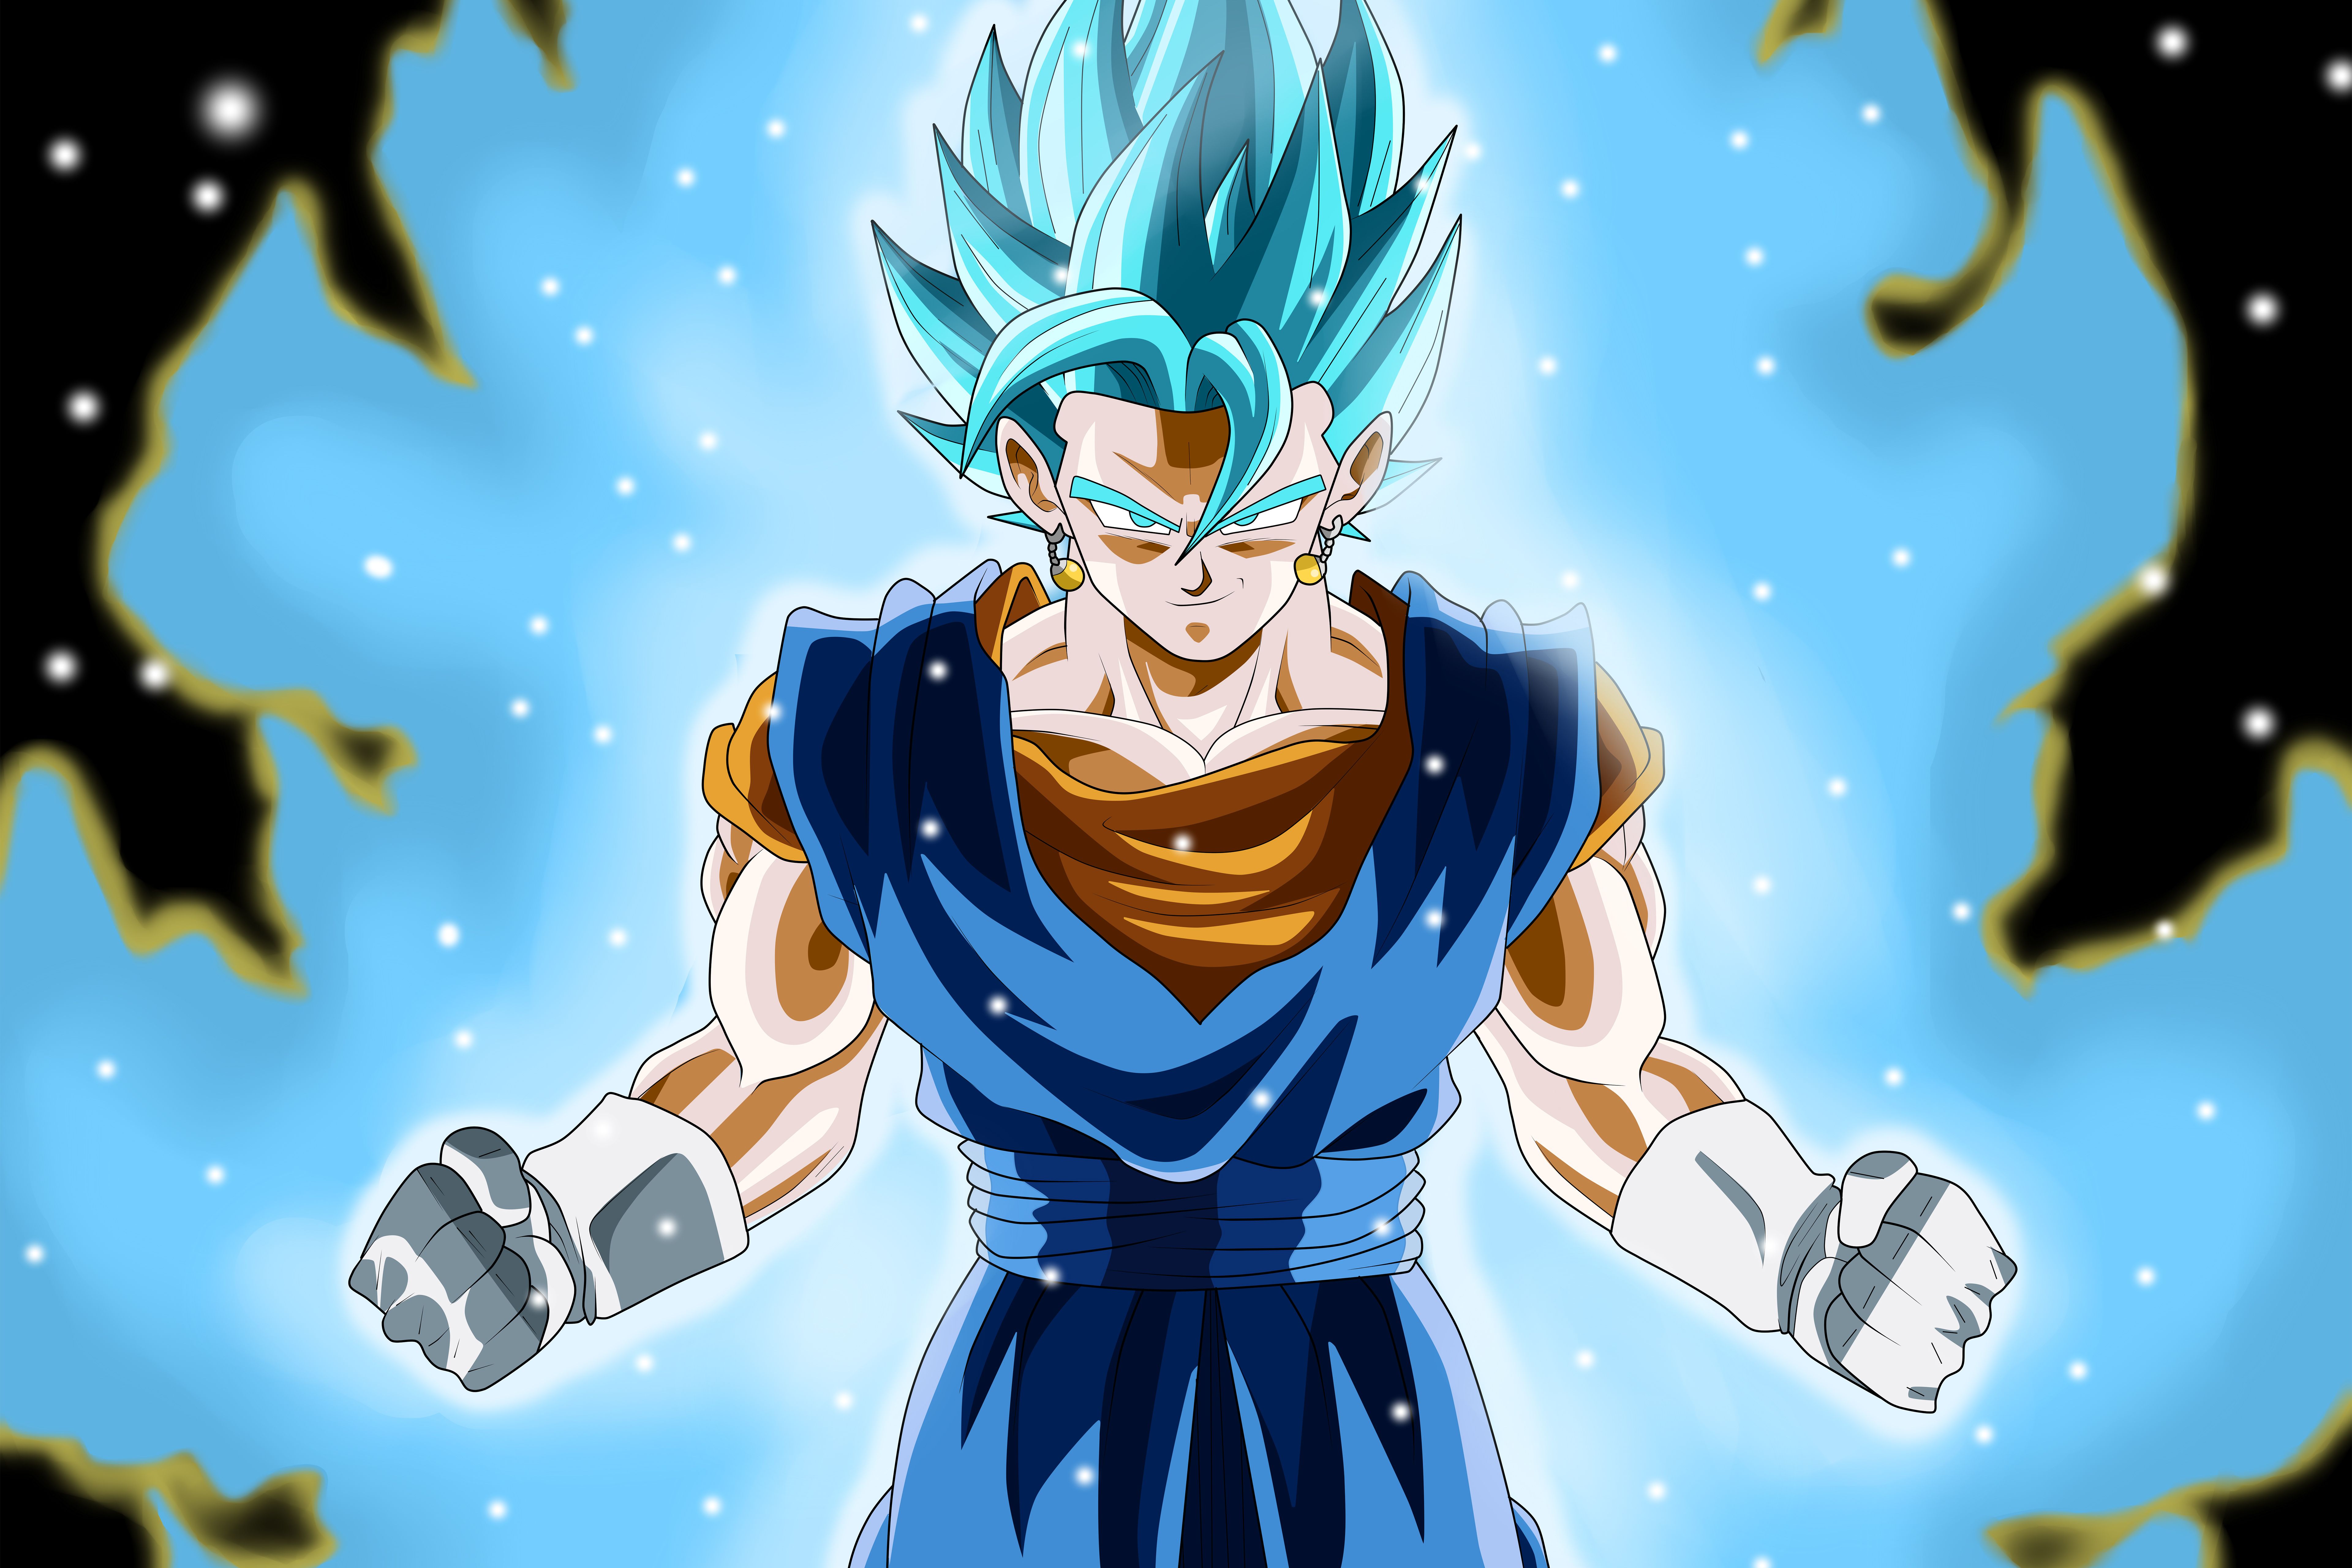 Vegito blue wallpaper by nimic94 - Download on ZEDGE™